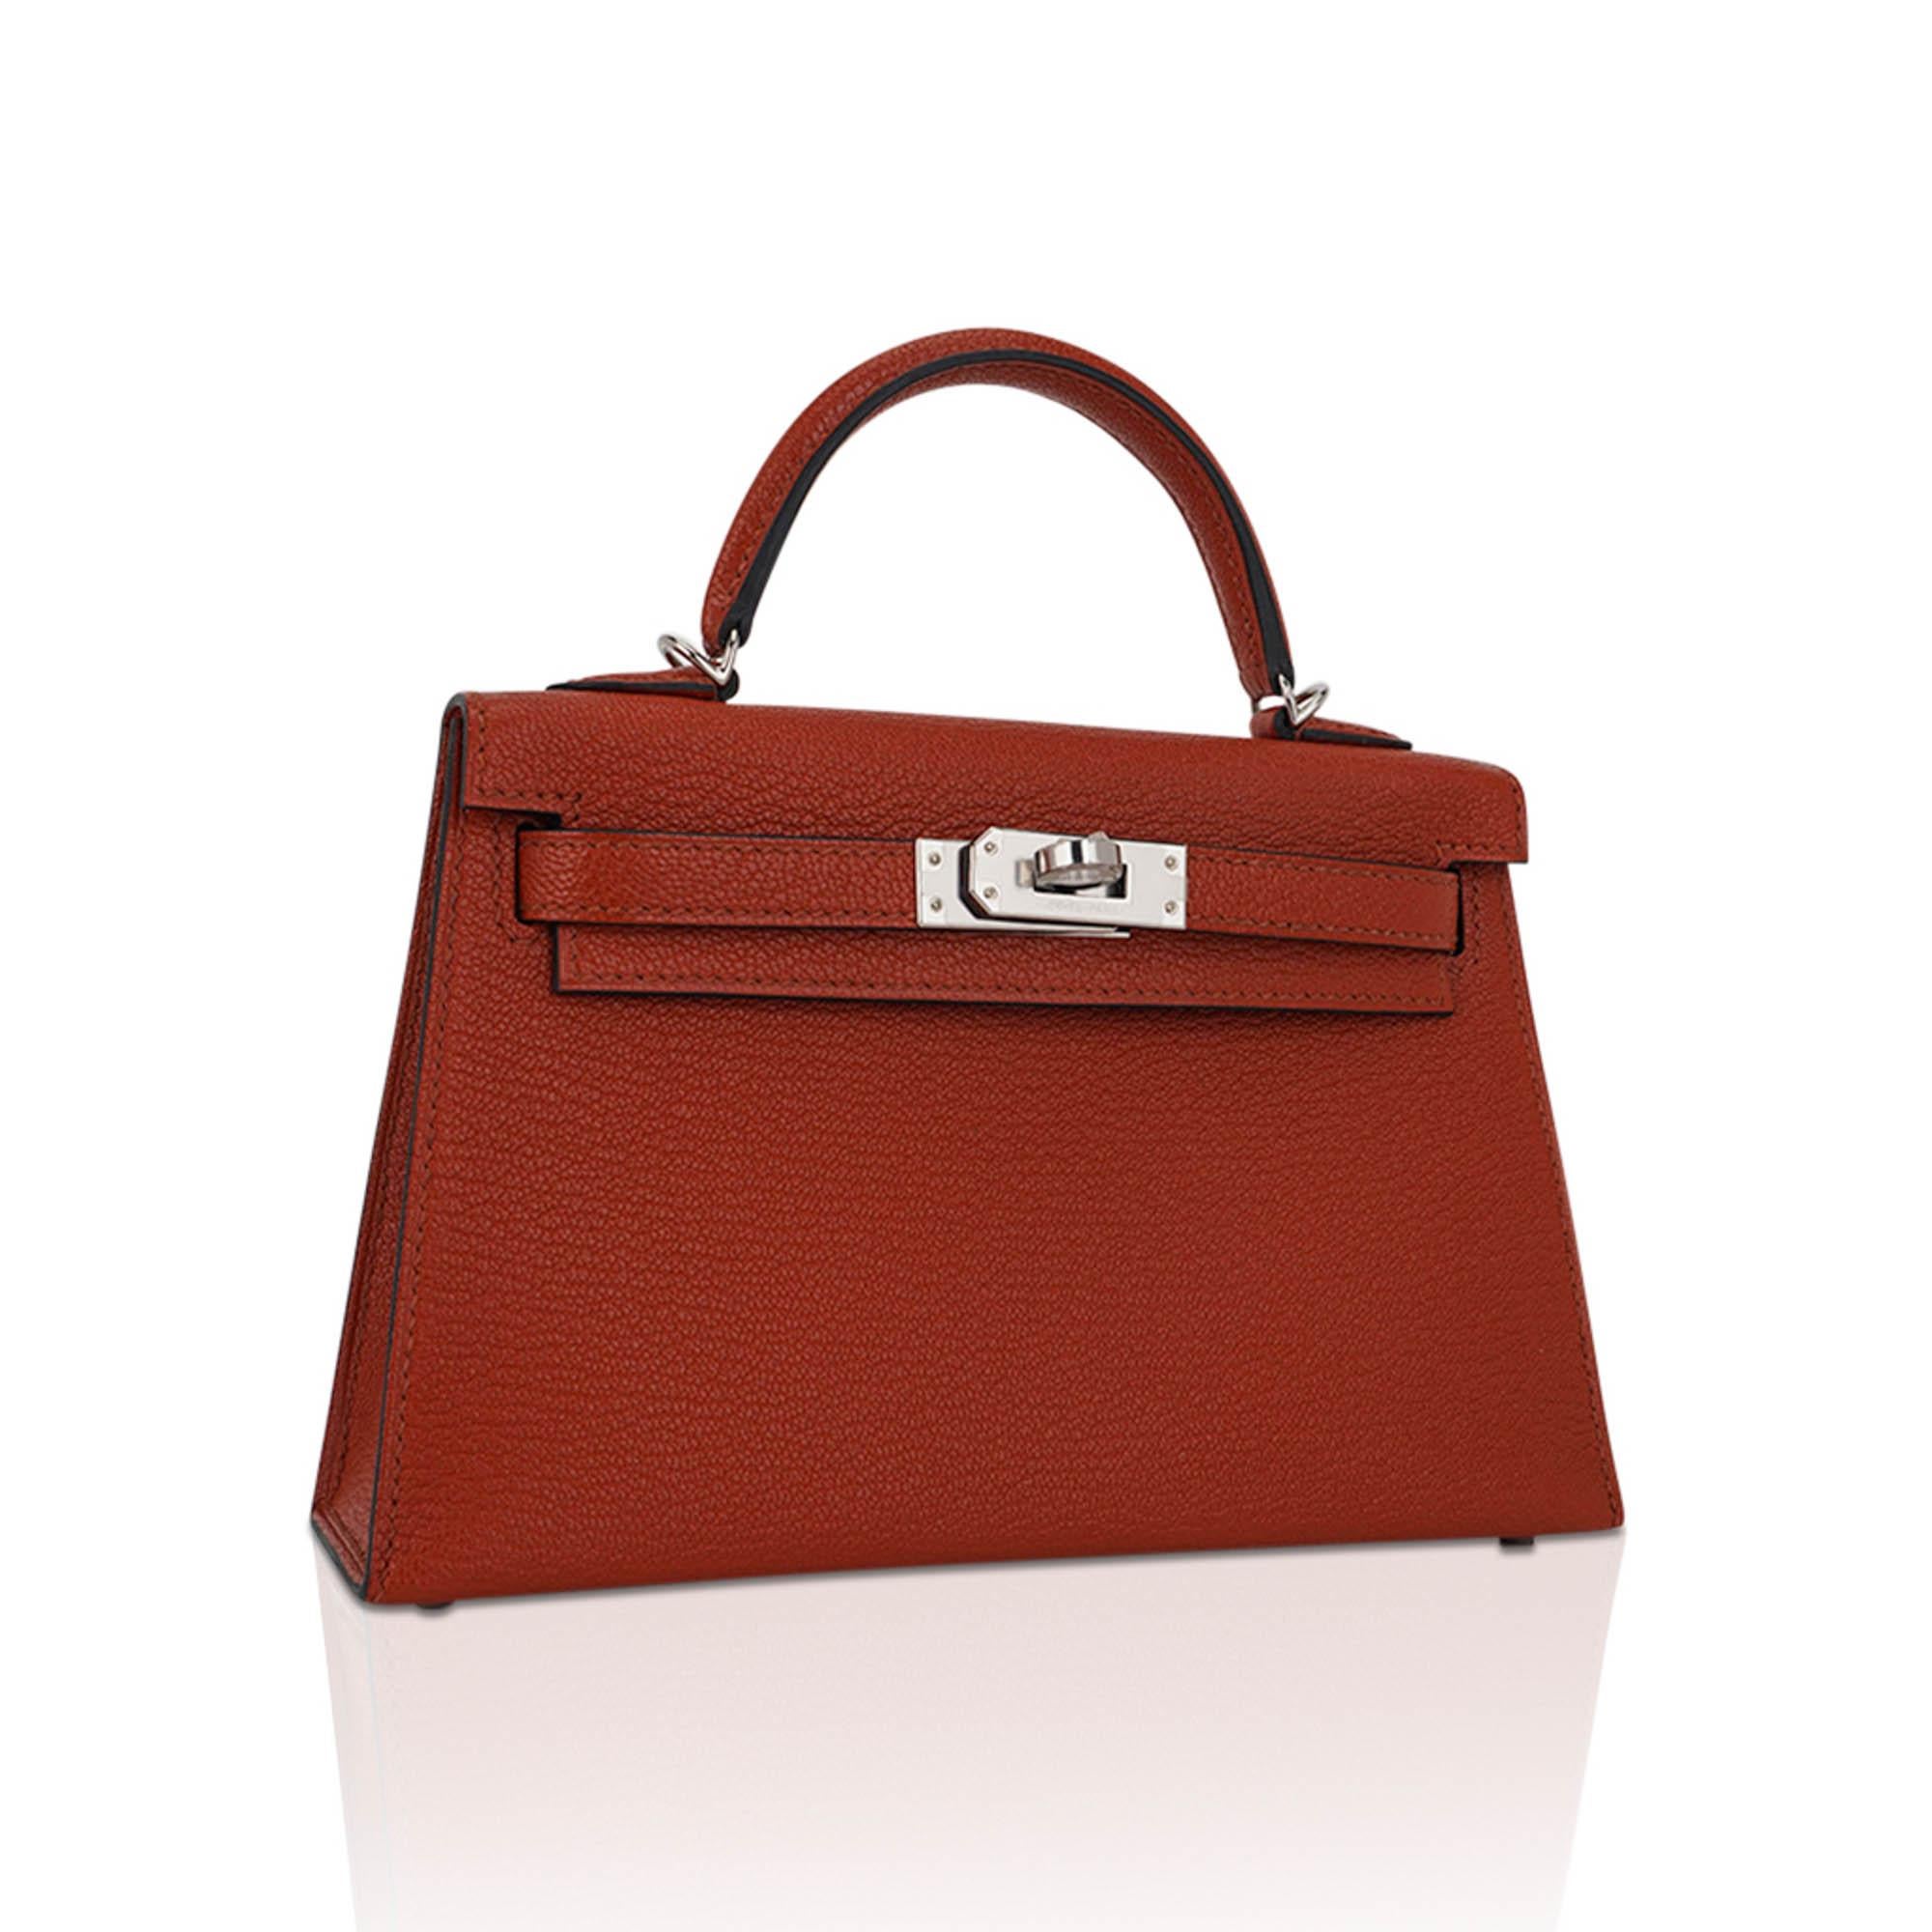 Mightychic offers an Hermes Kelly 20 mini bag featured in Cuivre (Copper).
A stunning colour inspired by the metal, Cuivre is a saturated coppery brown.
Crisp with Palladium hardware.
This exquisite color is show cased in Chevre leather.
Fresh and